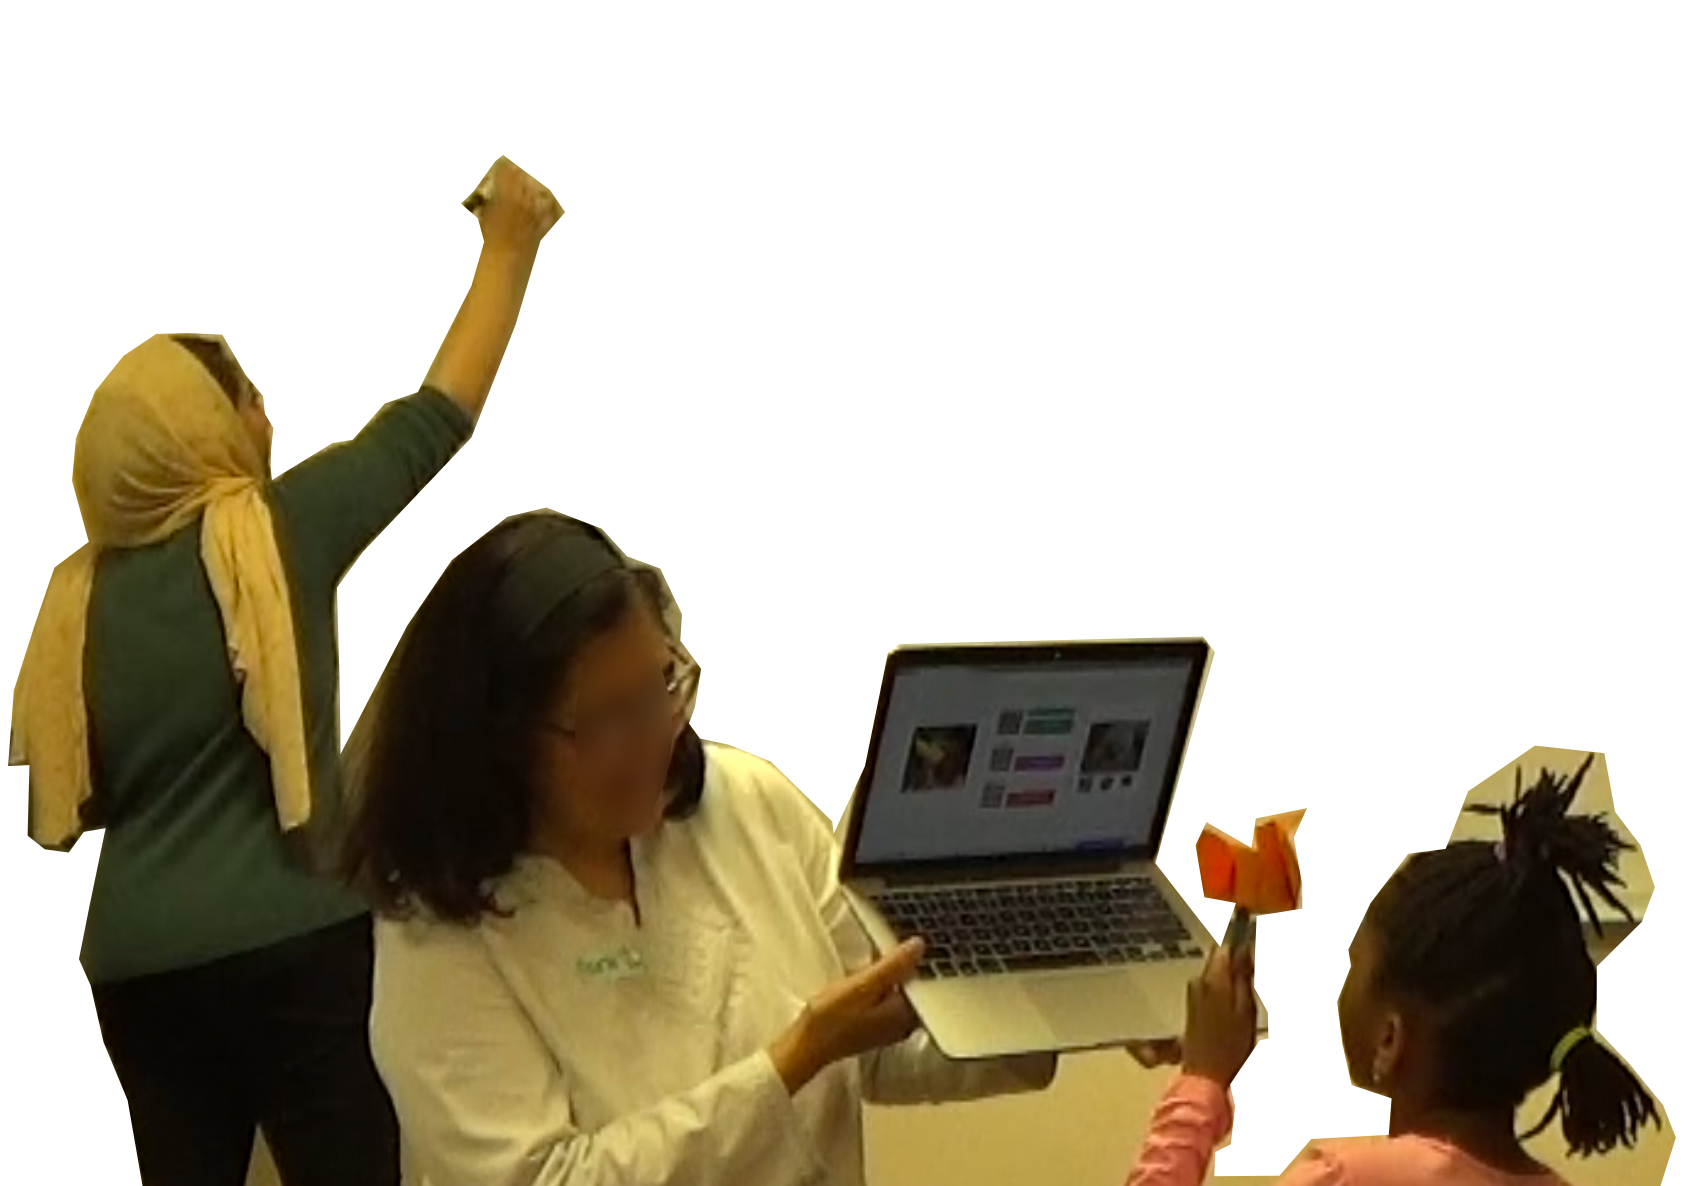 An image where children are demonstrating their trained models to a class. A child holds an origami while an adult holds the laptop and another adult is taking notes on a whiteboard.